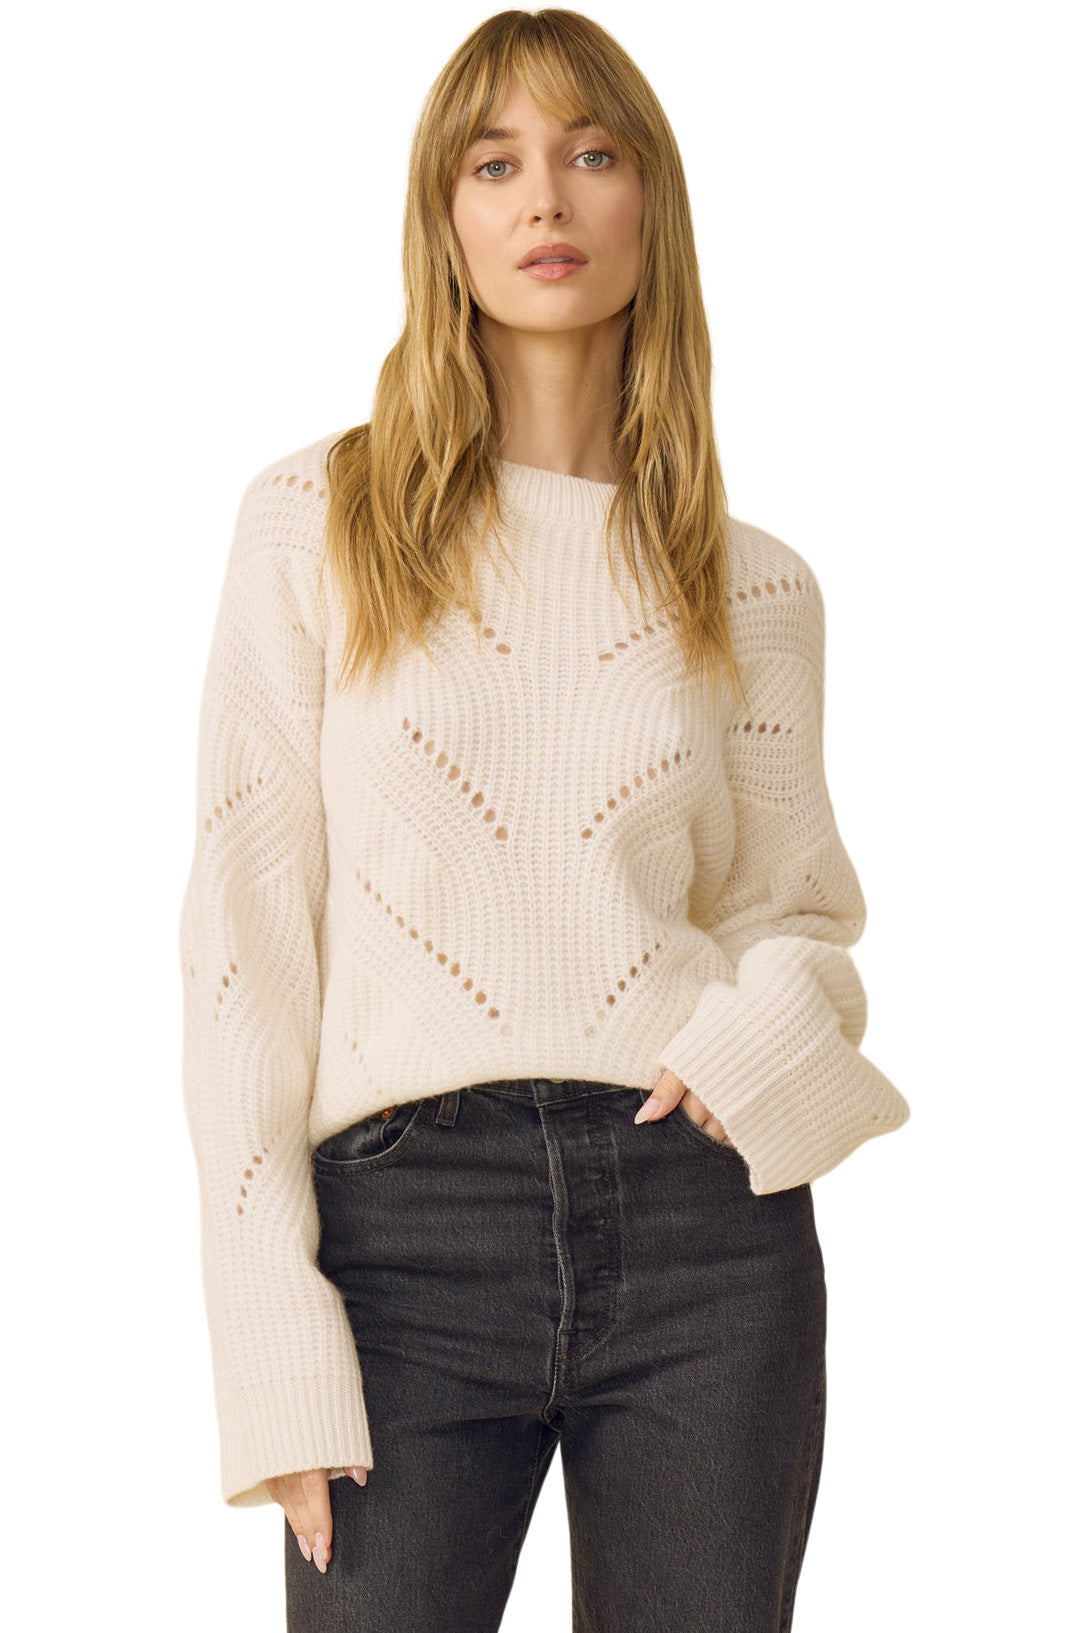 One Grey Day Amarilla Cashmere Pullover in Ivory